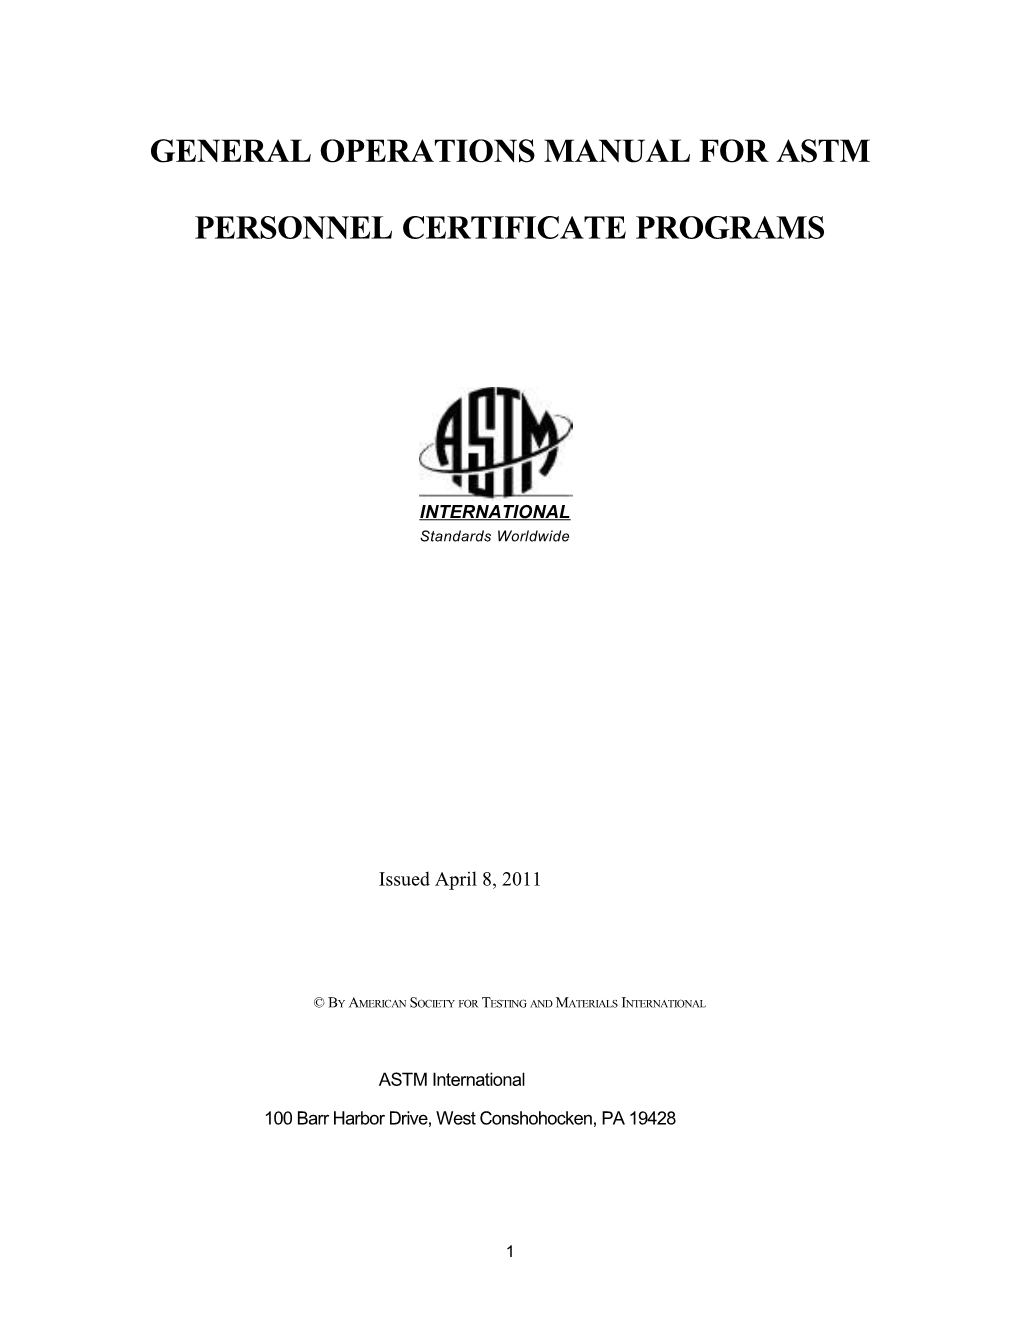 General Operations Manual for Astm Product Certificaton Programs